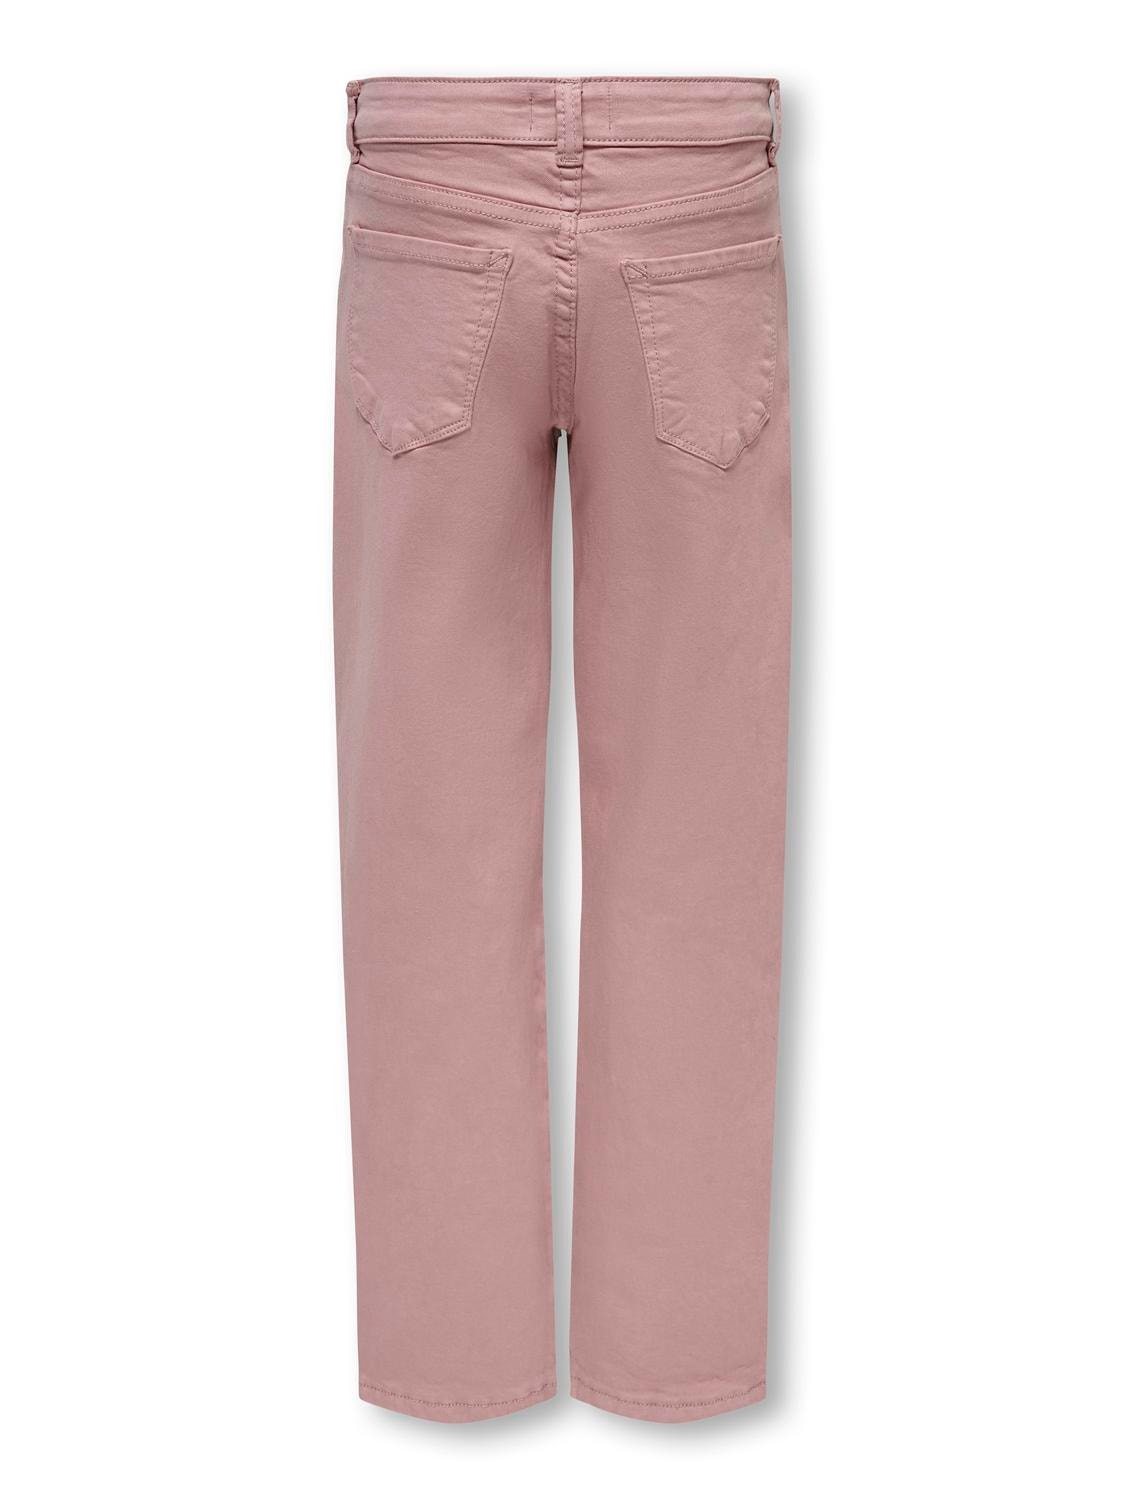 ONLY Regular Fit Trousers -Nostalgia Rose - 15280830